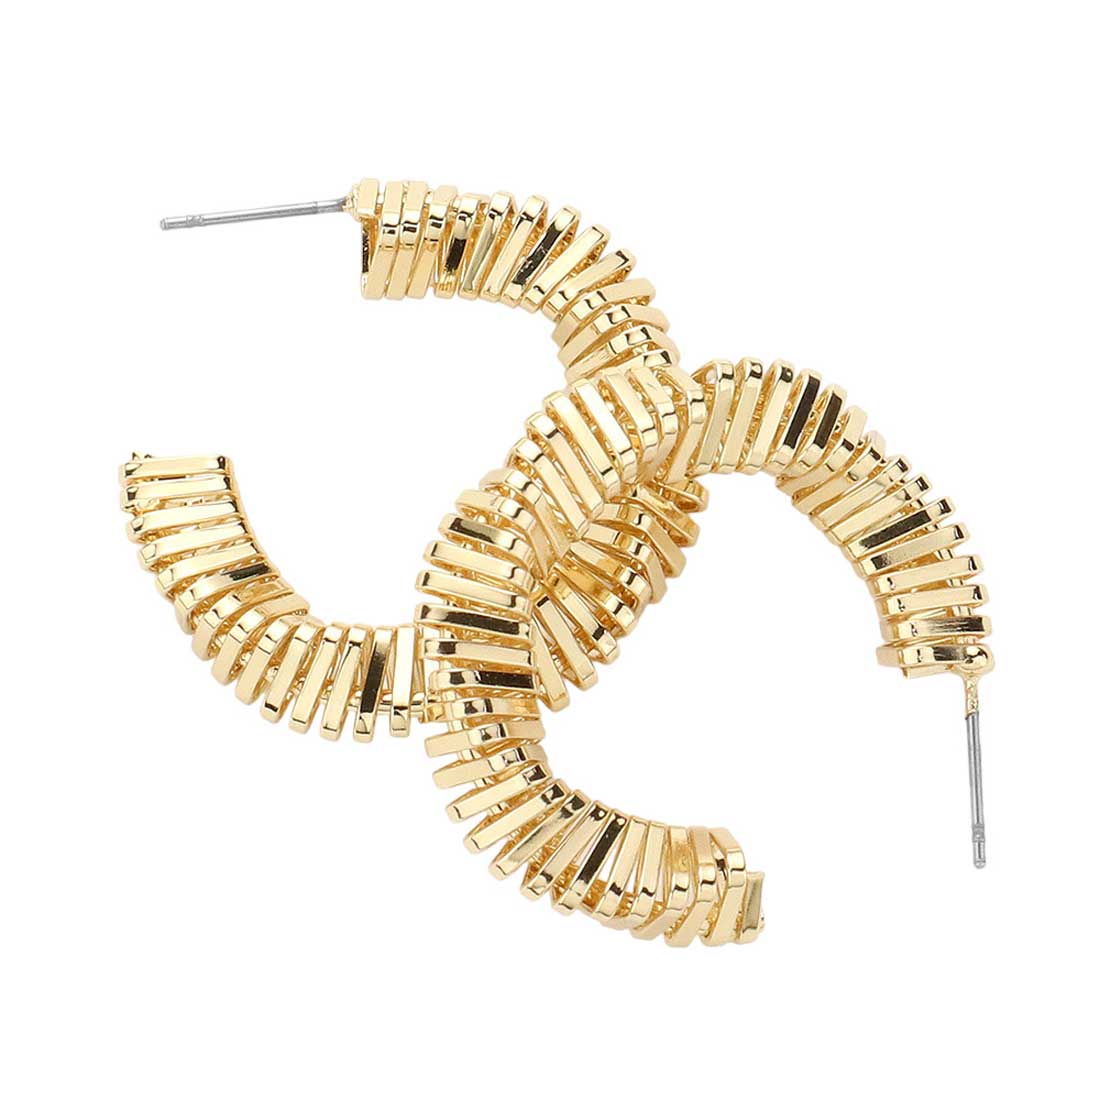 Gold Twisted Metal Hoop Earrings, are fun handcrafted jewelry that fits your lifestyle, adding a pop of pretty color. Enhance your attire with these vibrant artisanal earrings to show off your fun trendsetting style. Great gift idea for your Wife, Mom, your Loving one, or any family member.